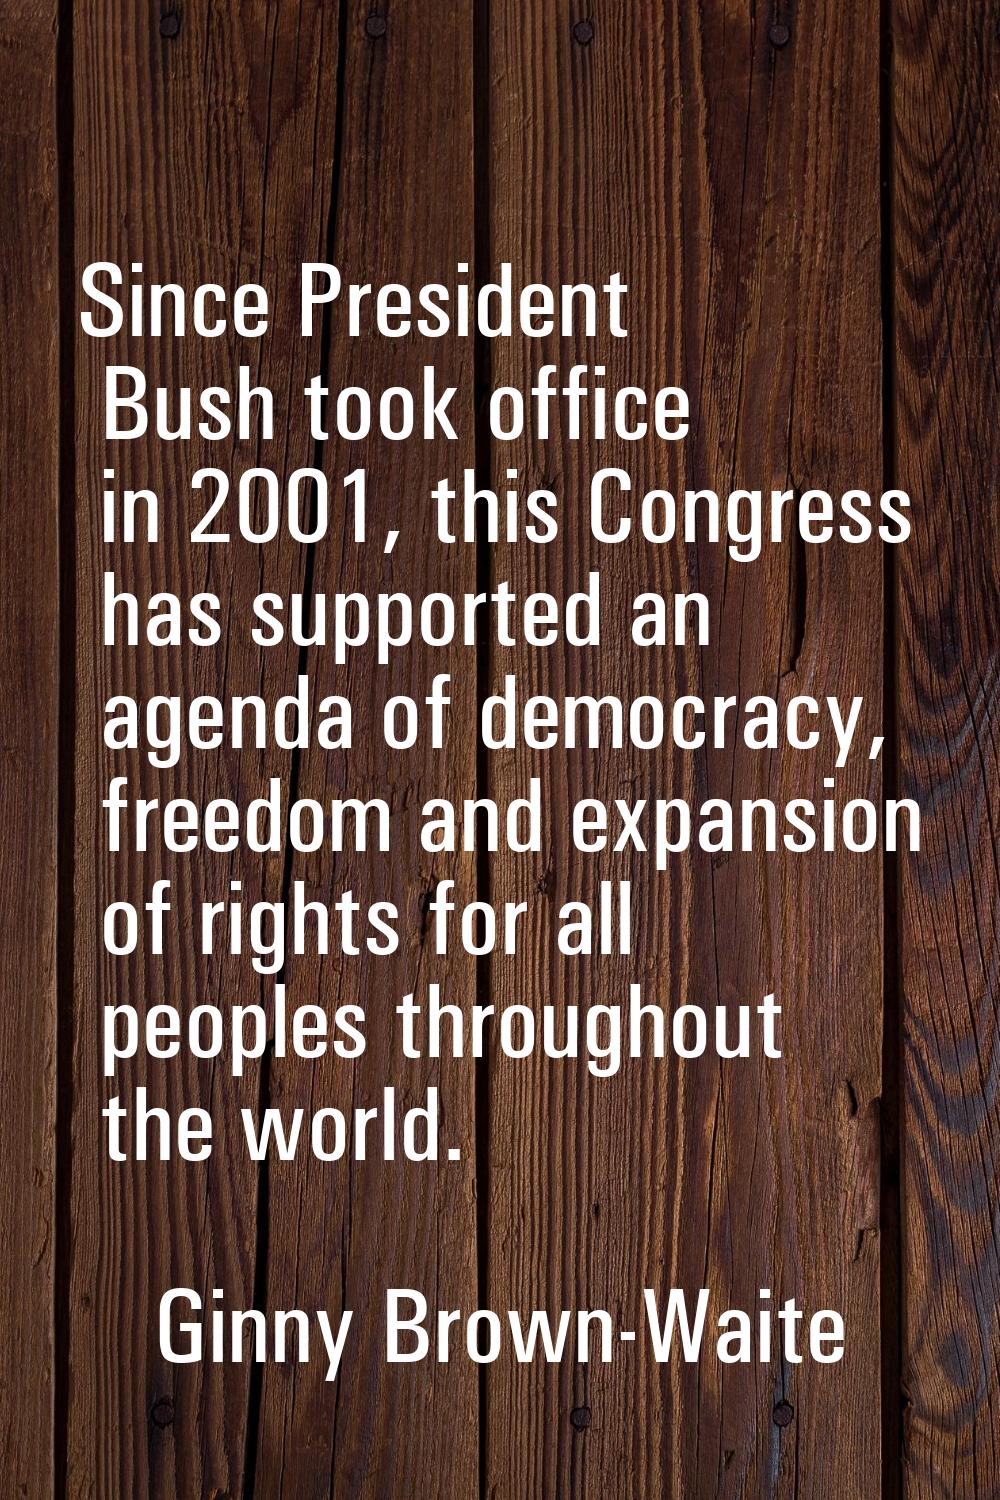 Since President Bush took office in 2001, this Congress has supported an agenda of democracy, freed